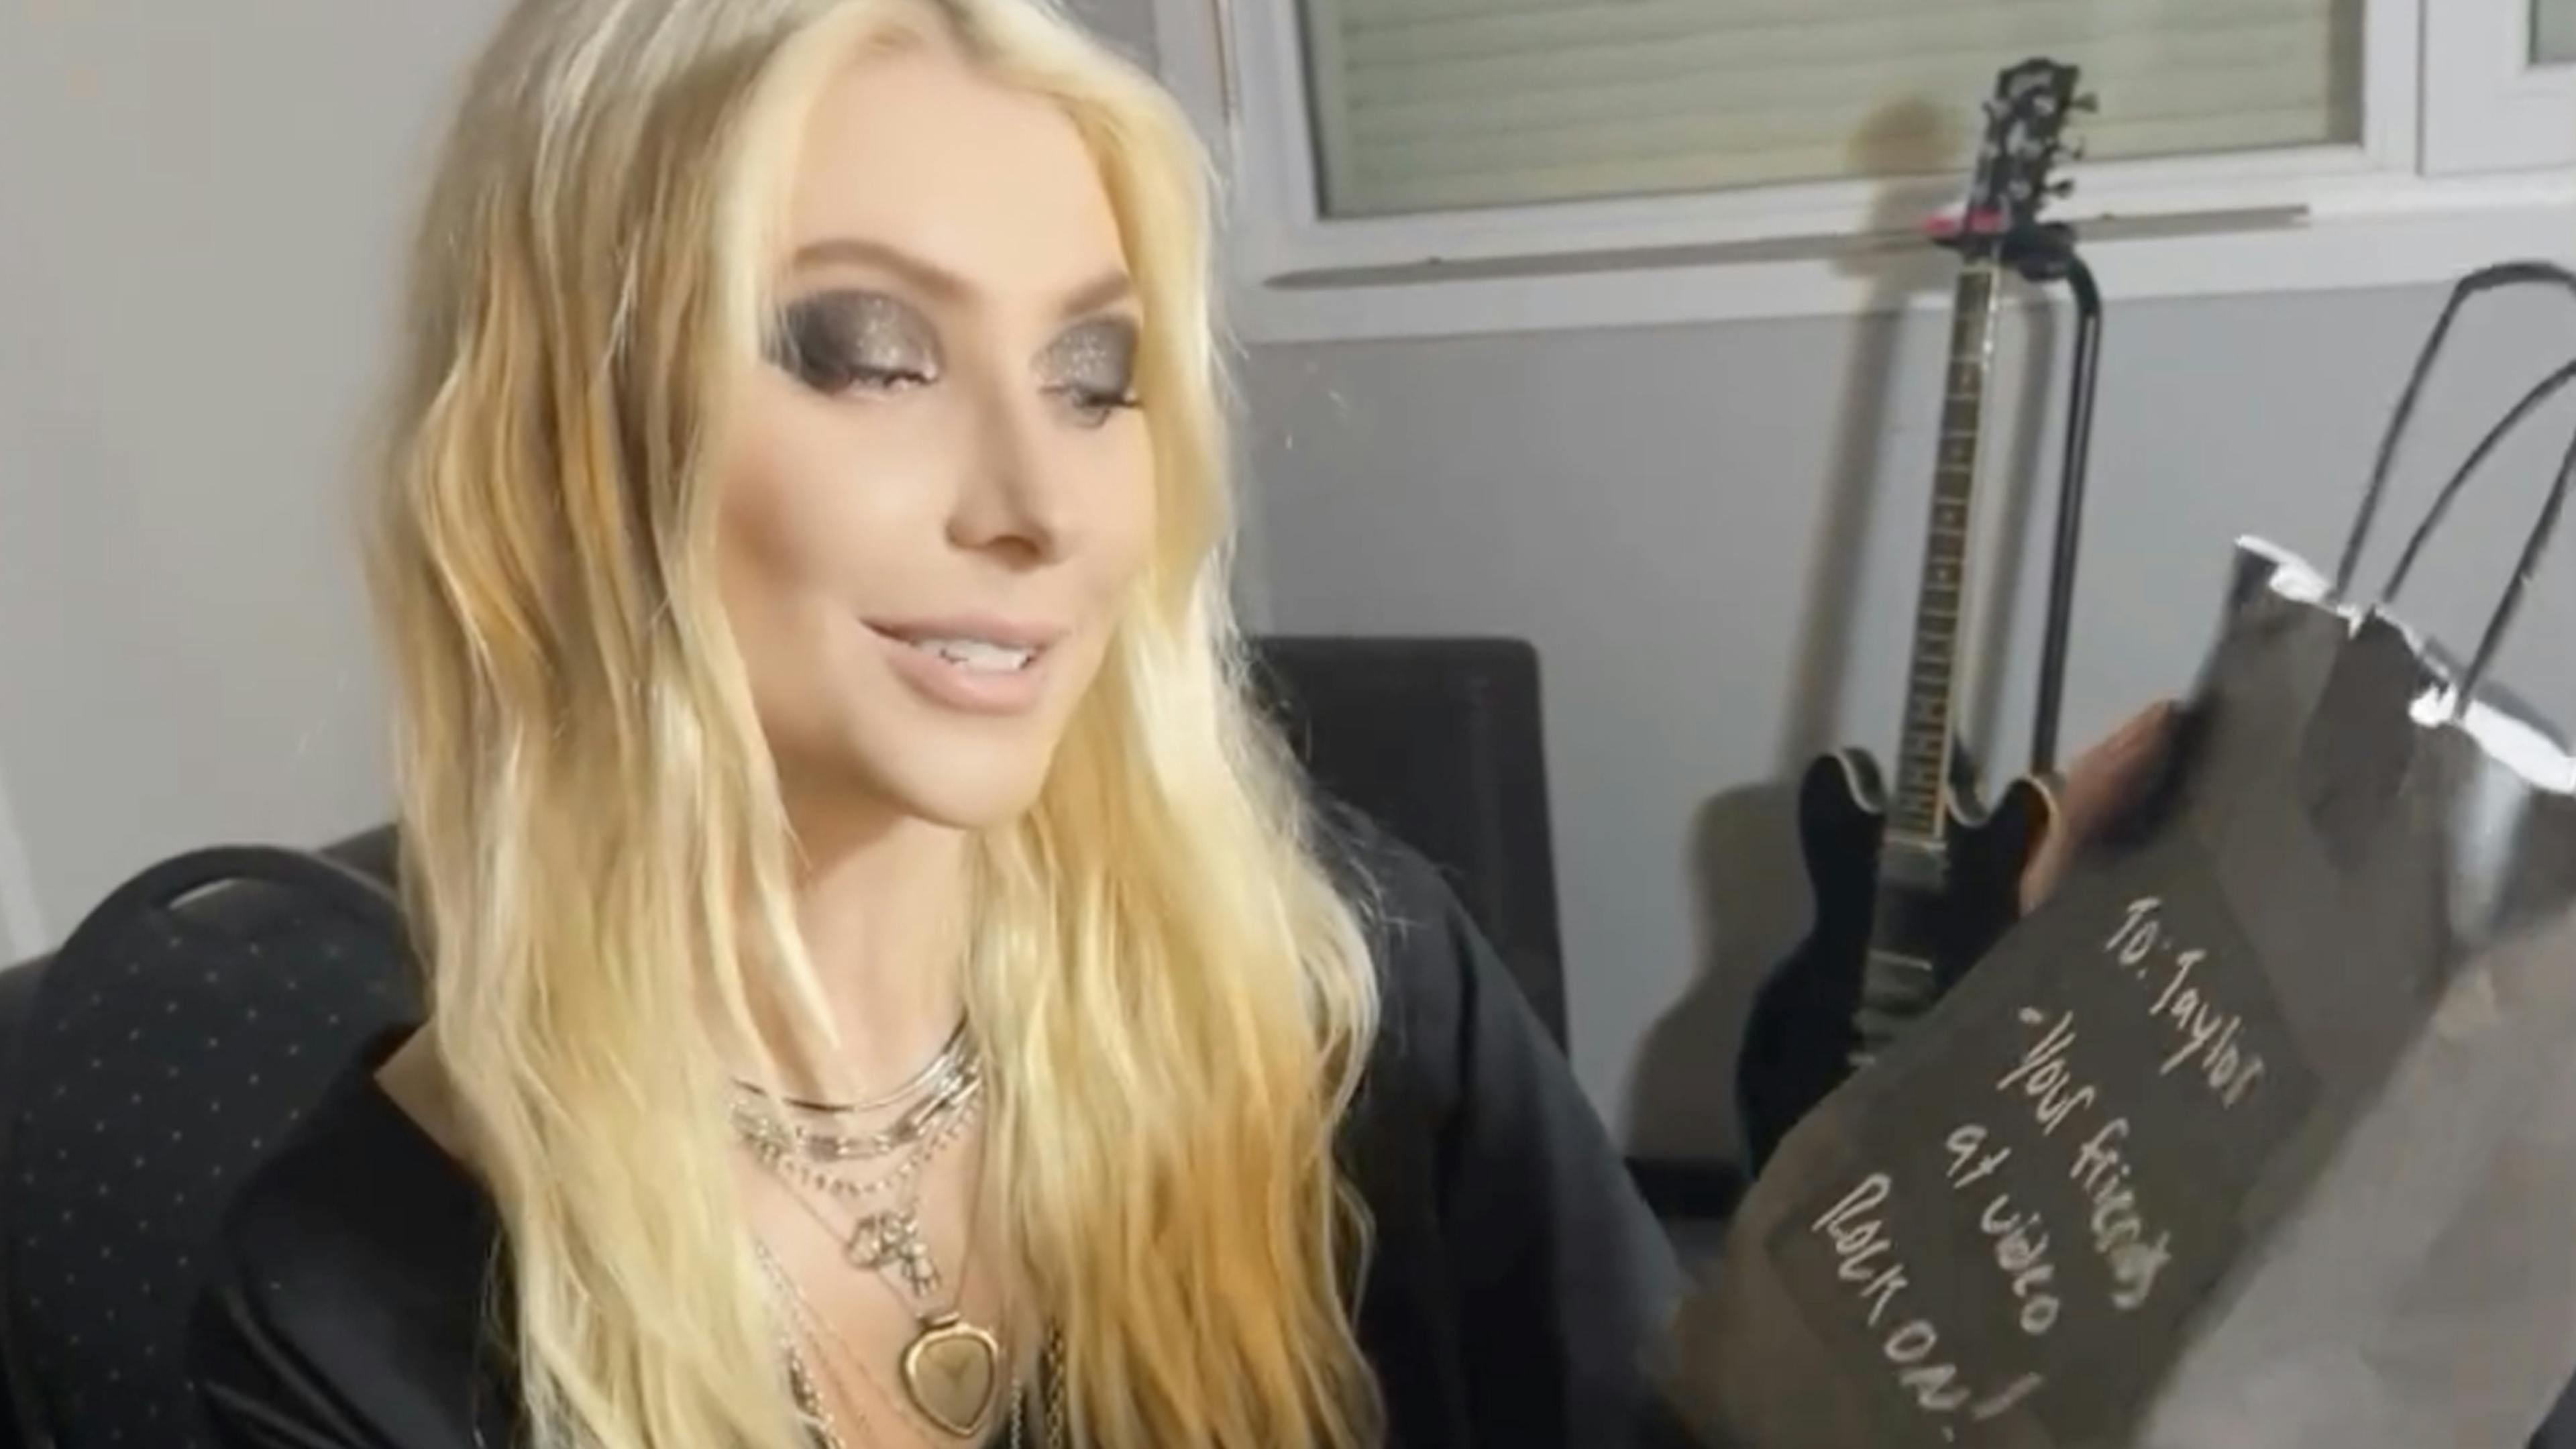 AC/DC’s crew sent Taylor Momsen a fun gift after she was bitten by a bat onstage